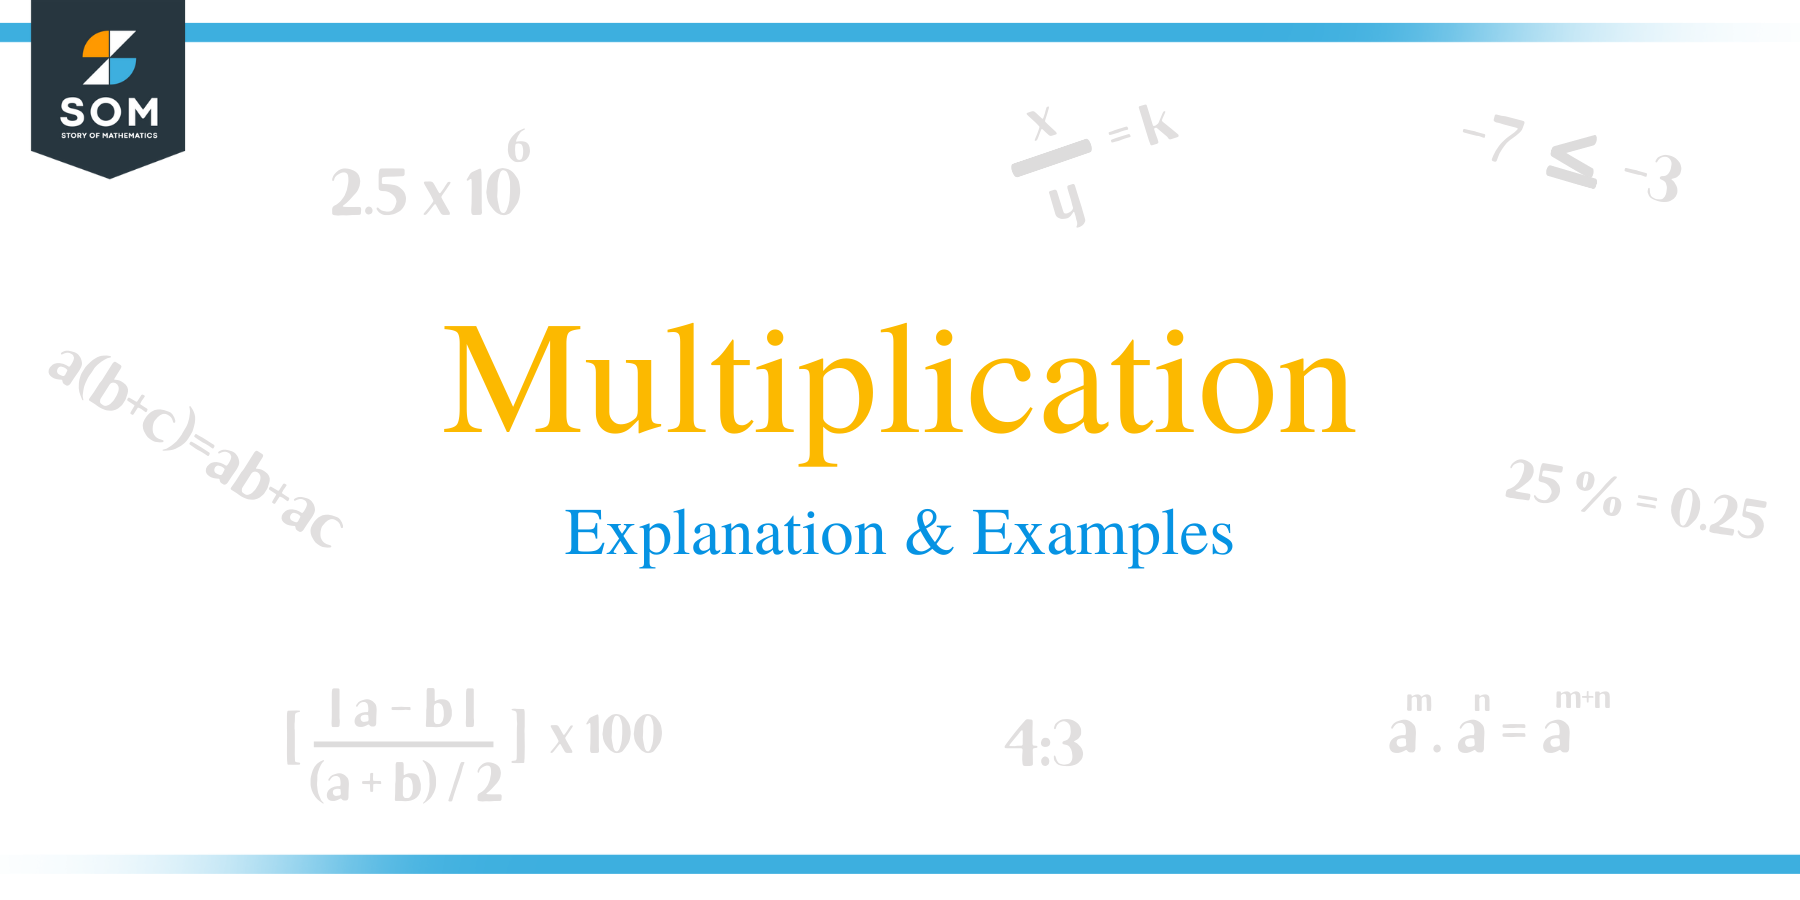 What is Multiplication